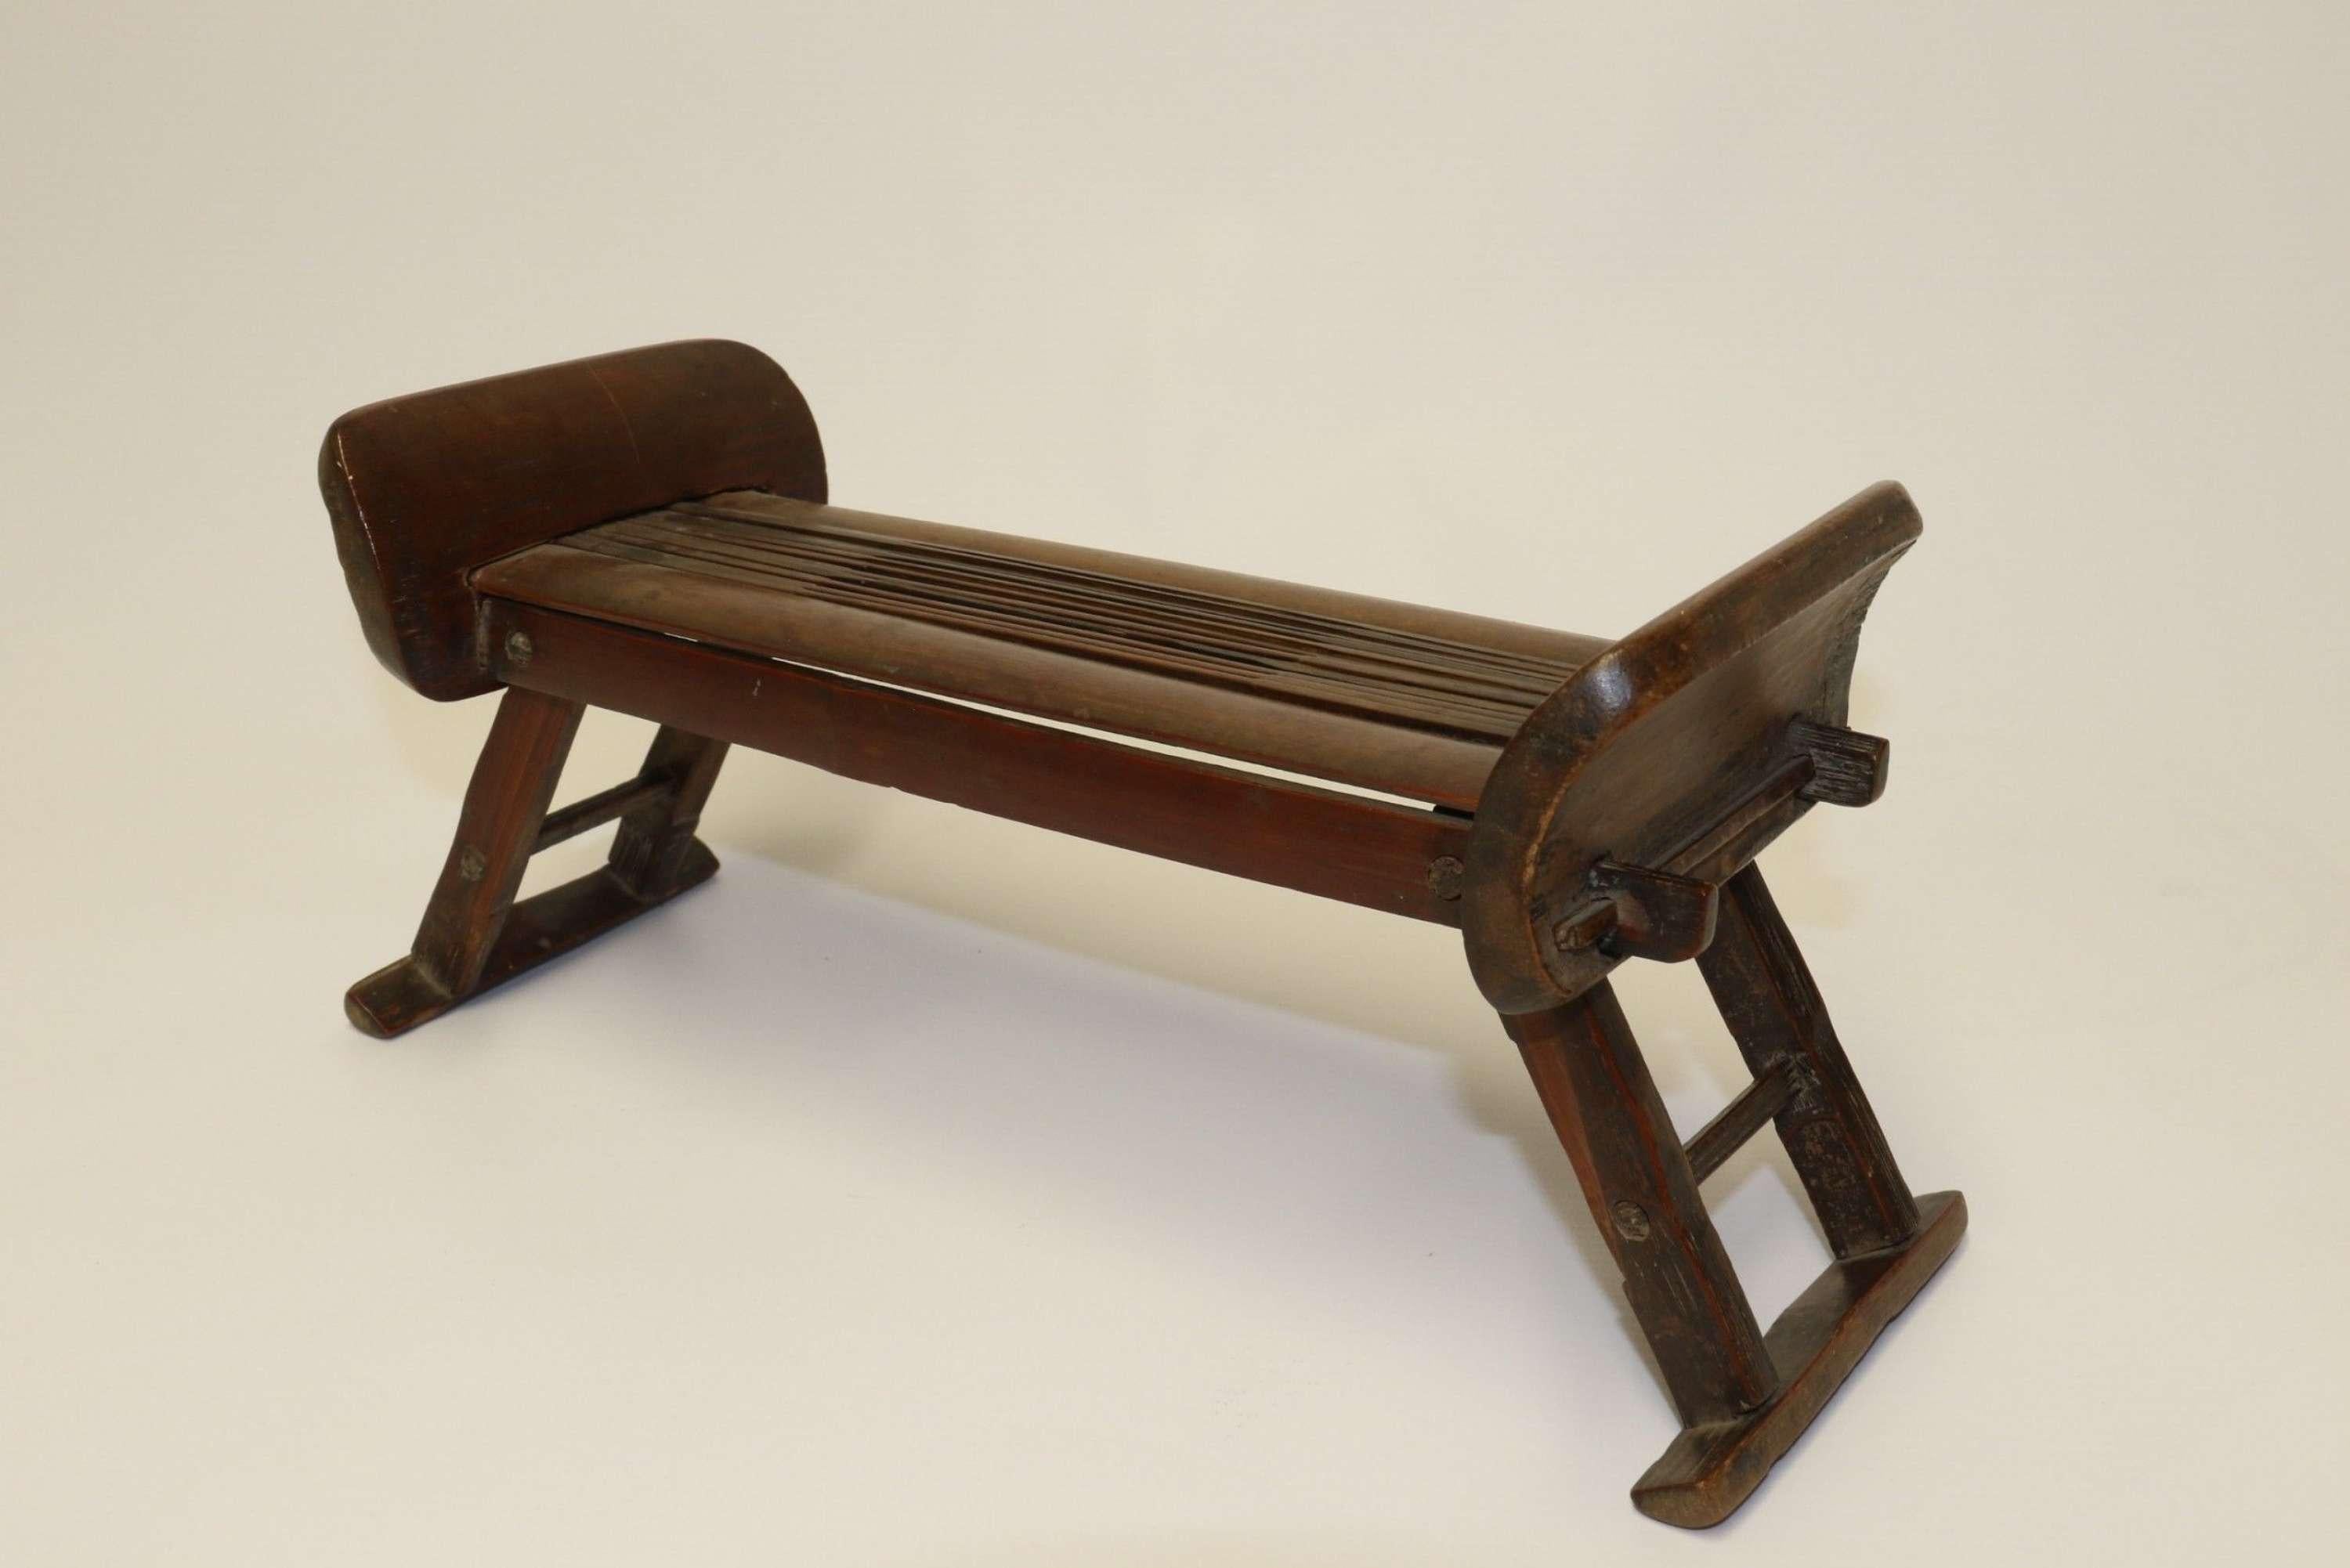 A rare 19th century Chinese folding bamboo headrest.

This ingenious rare and beautifully made piece dates to circa 1800. It is cleverly designed enabling it to fold flat for ease of transport. This is not a decorative export item but would have